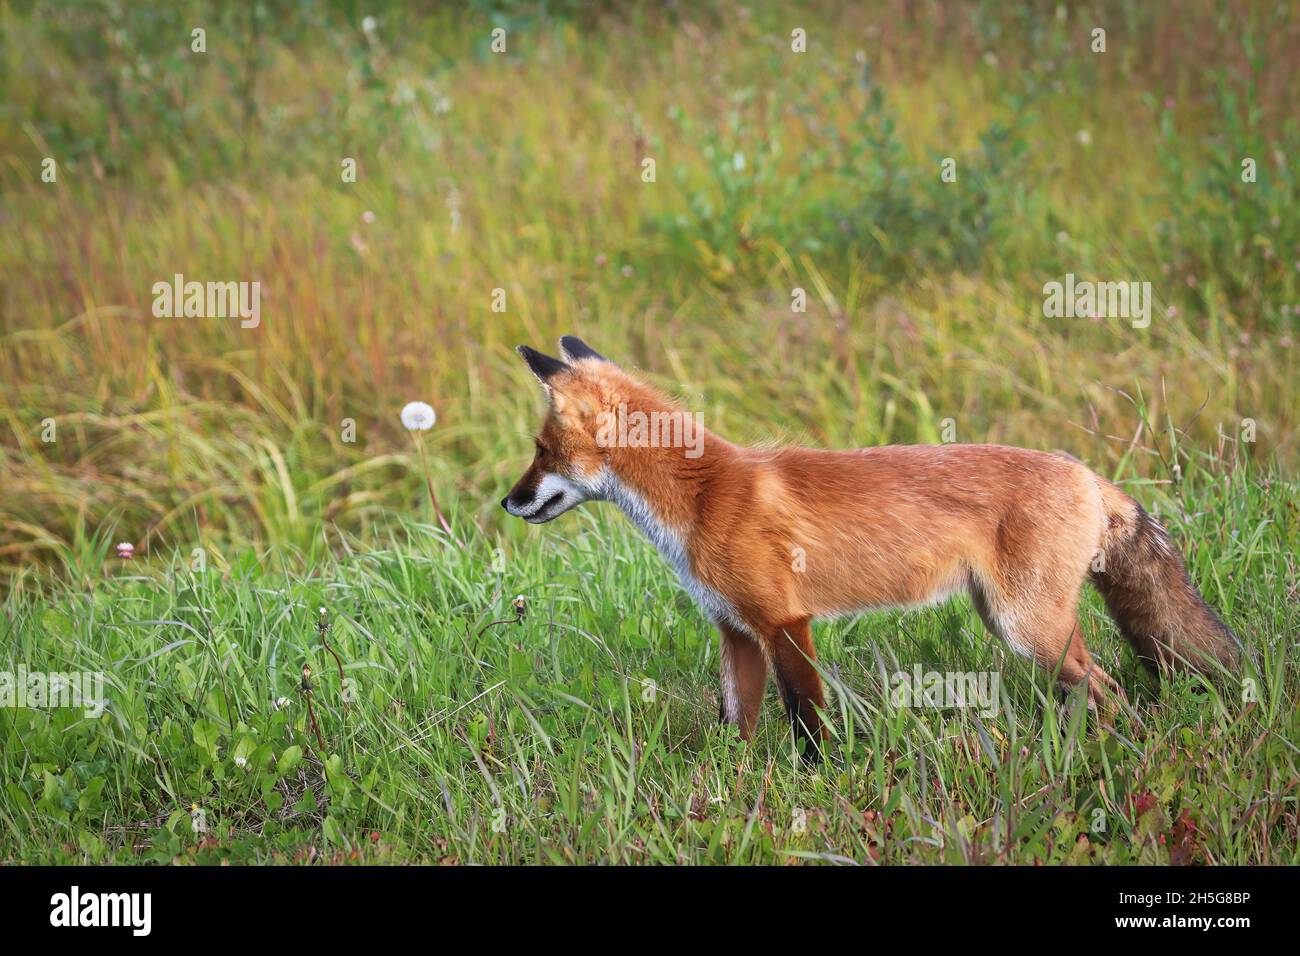 Closeup of a red fox hunting in grass Stock Photo